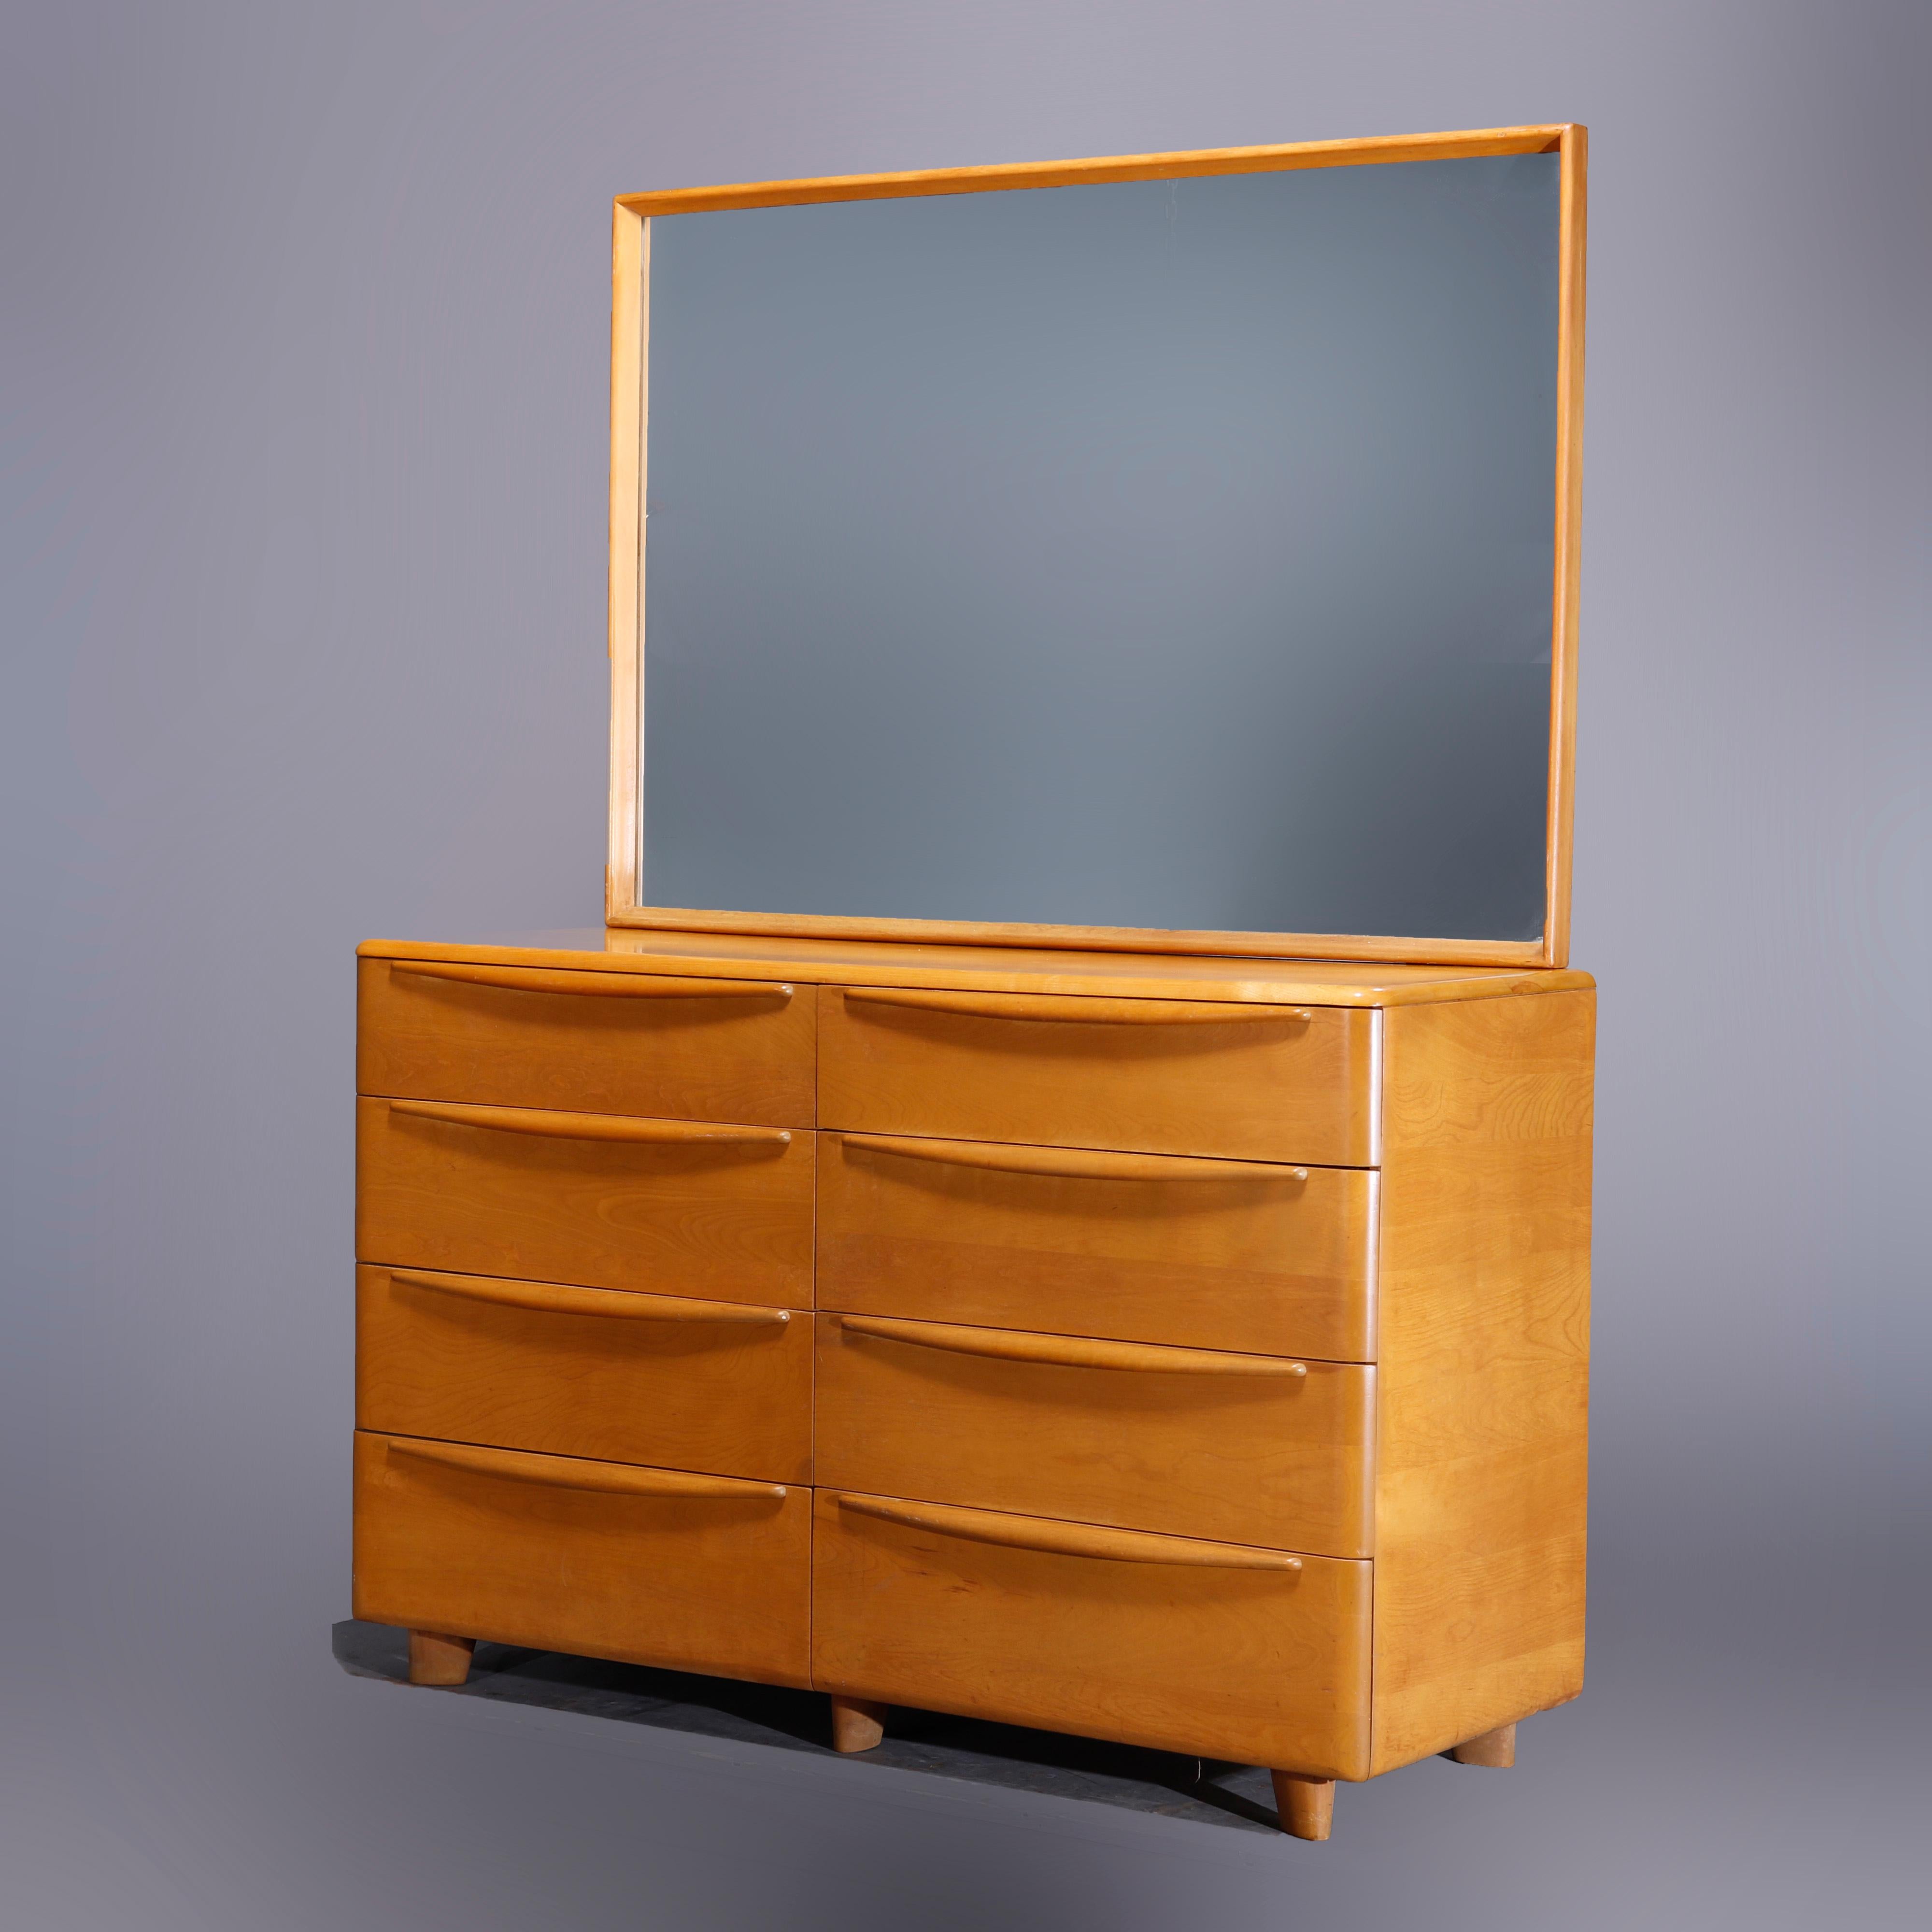 A Mid-Century Modern Heywood Wakefield double dresser in the Encore pattern offers birch construction with oversized mirror surmounting case having eight drawers, wheat finish, maker mark in drawer as photographed, c1950

Measures- 69.75''h x